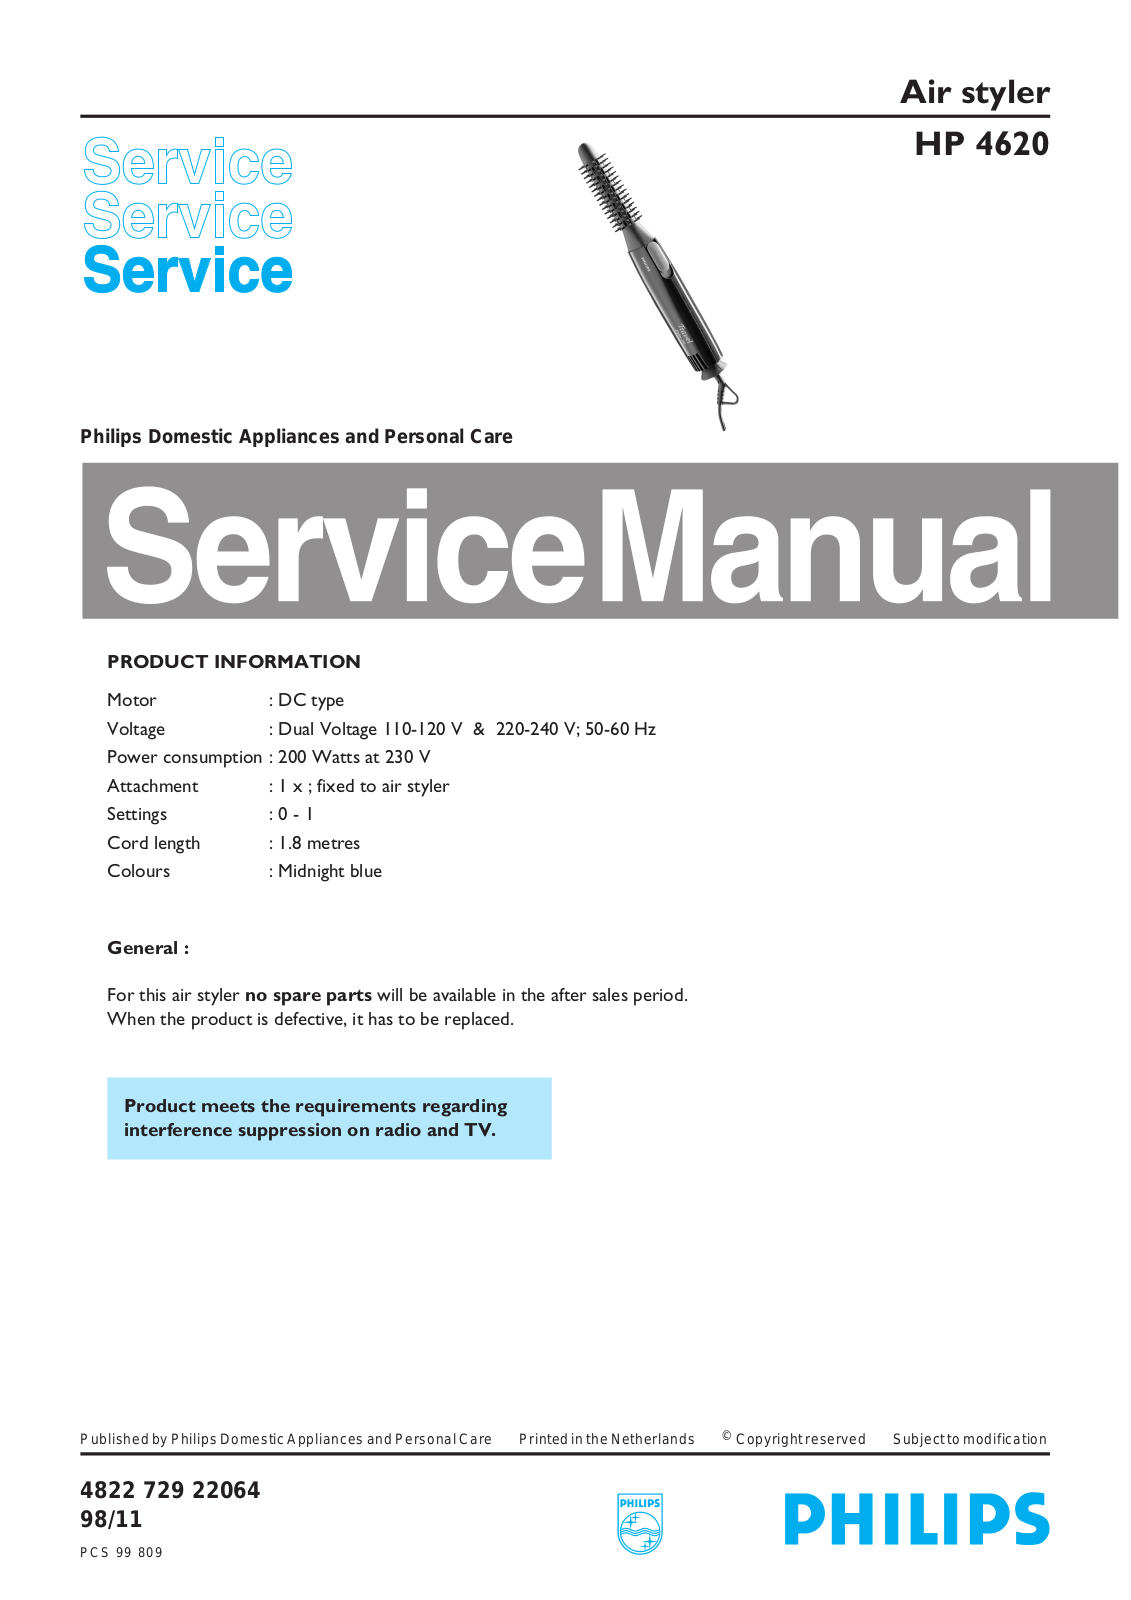 Philips HP 4620 Service Manual